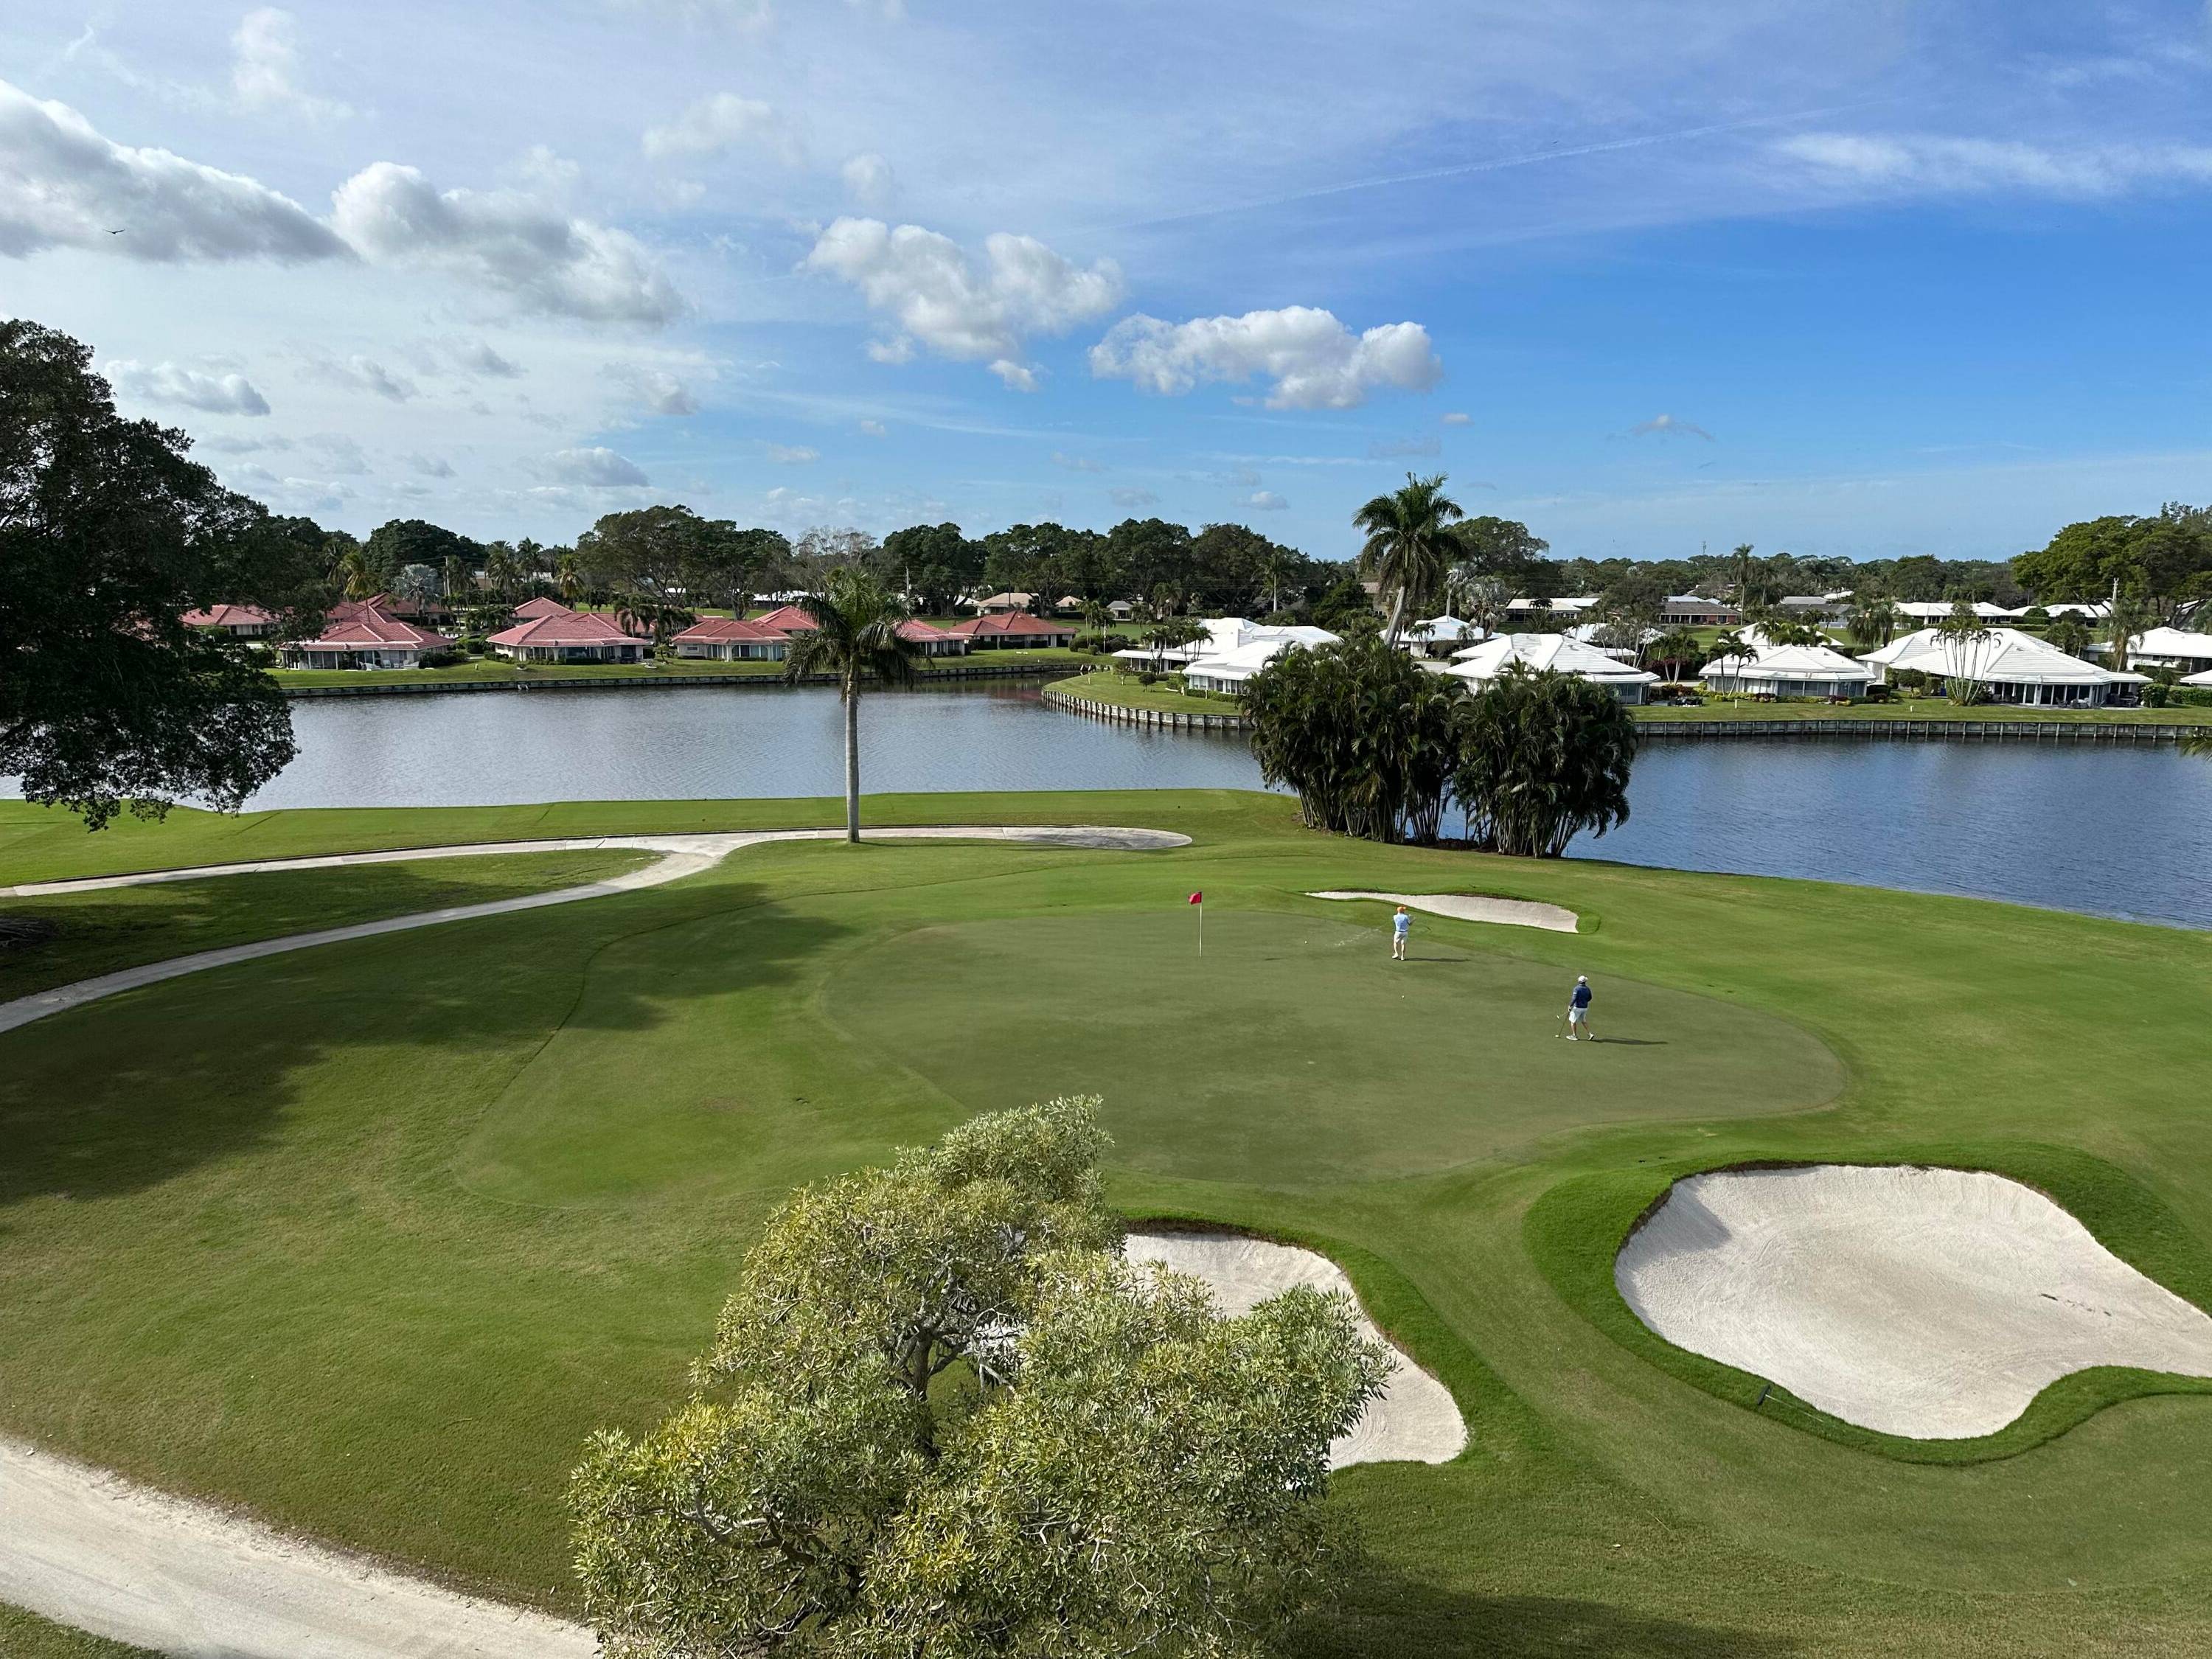 This beautiful Penthouse unit overlooking the green on the 2nd hole of the Lost City golf course with the lake in the background is the perfect spot to enjoy a ...